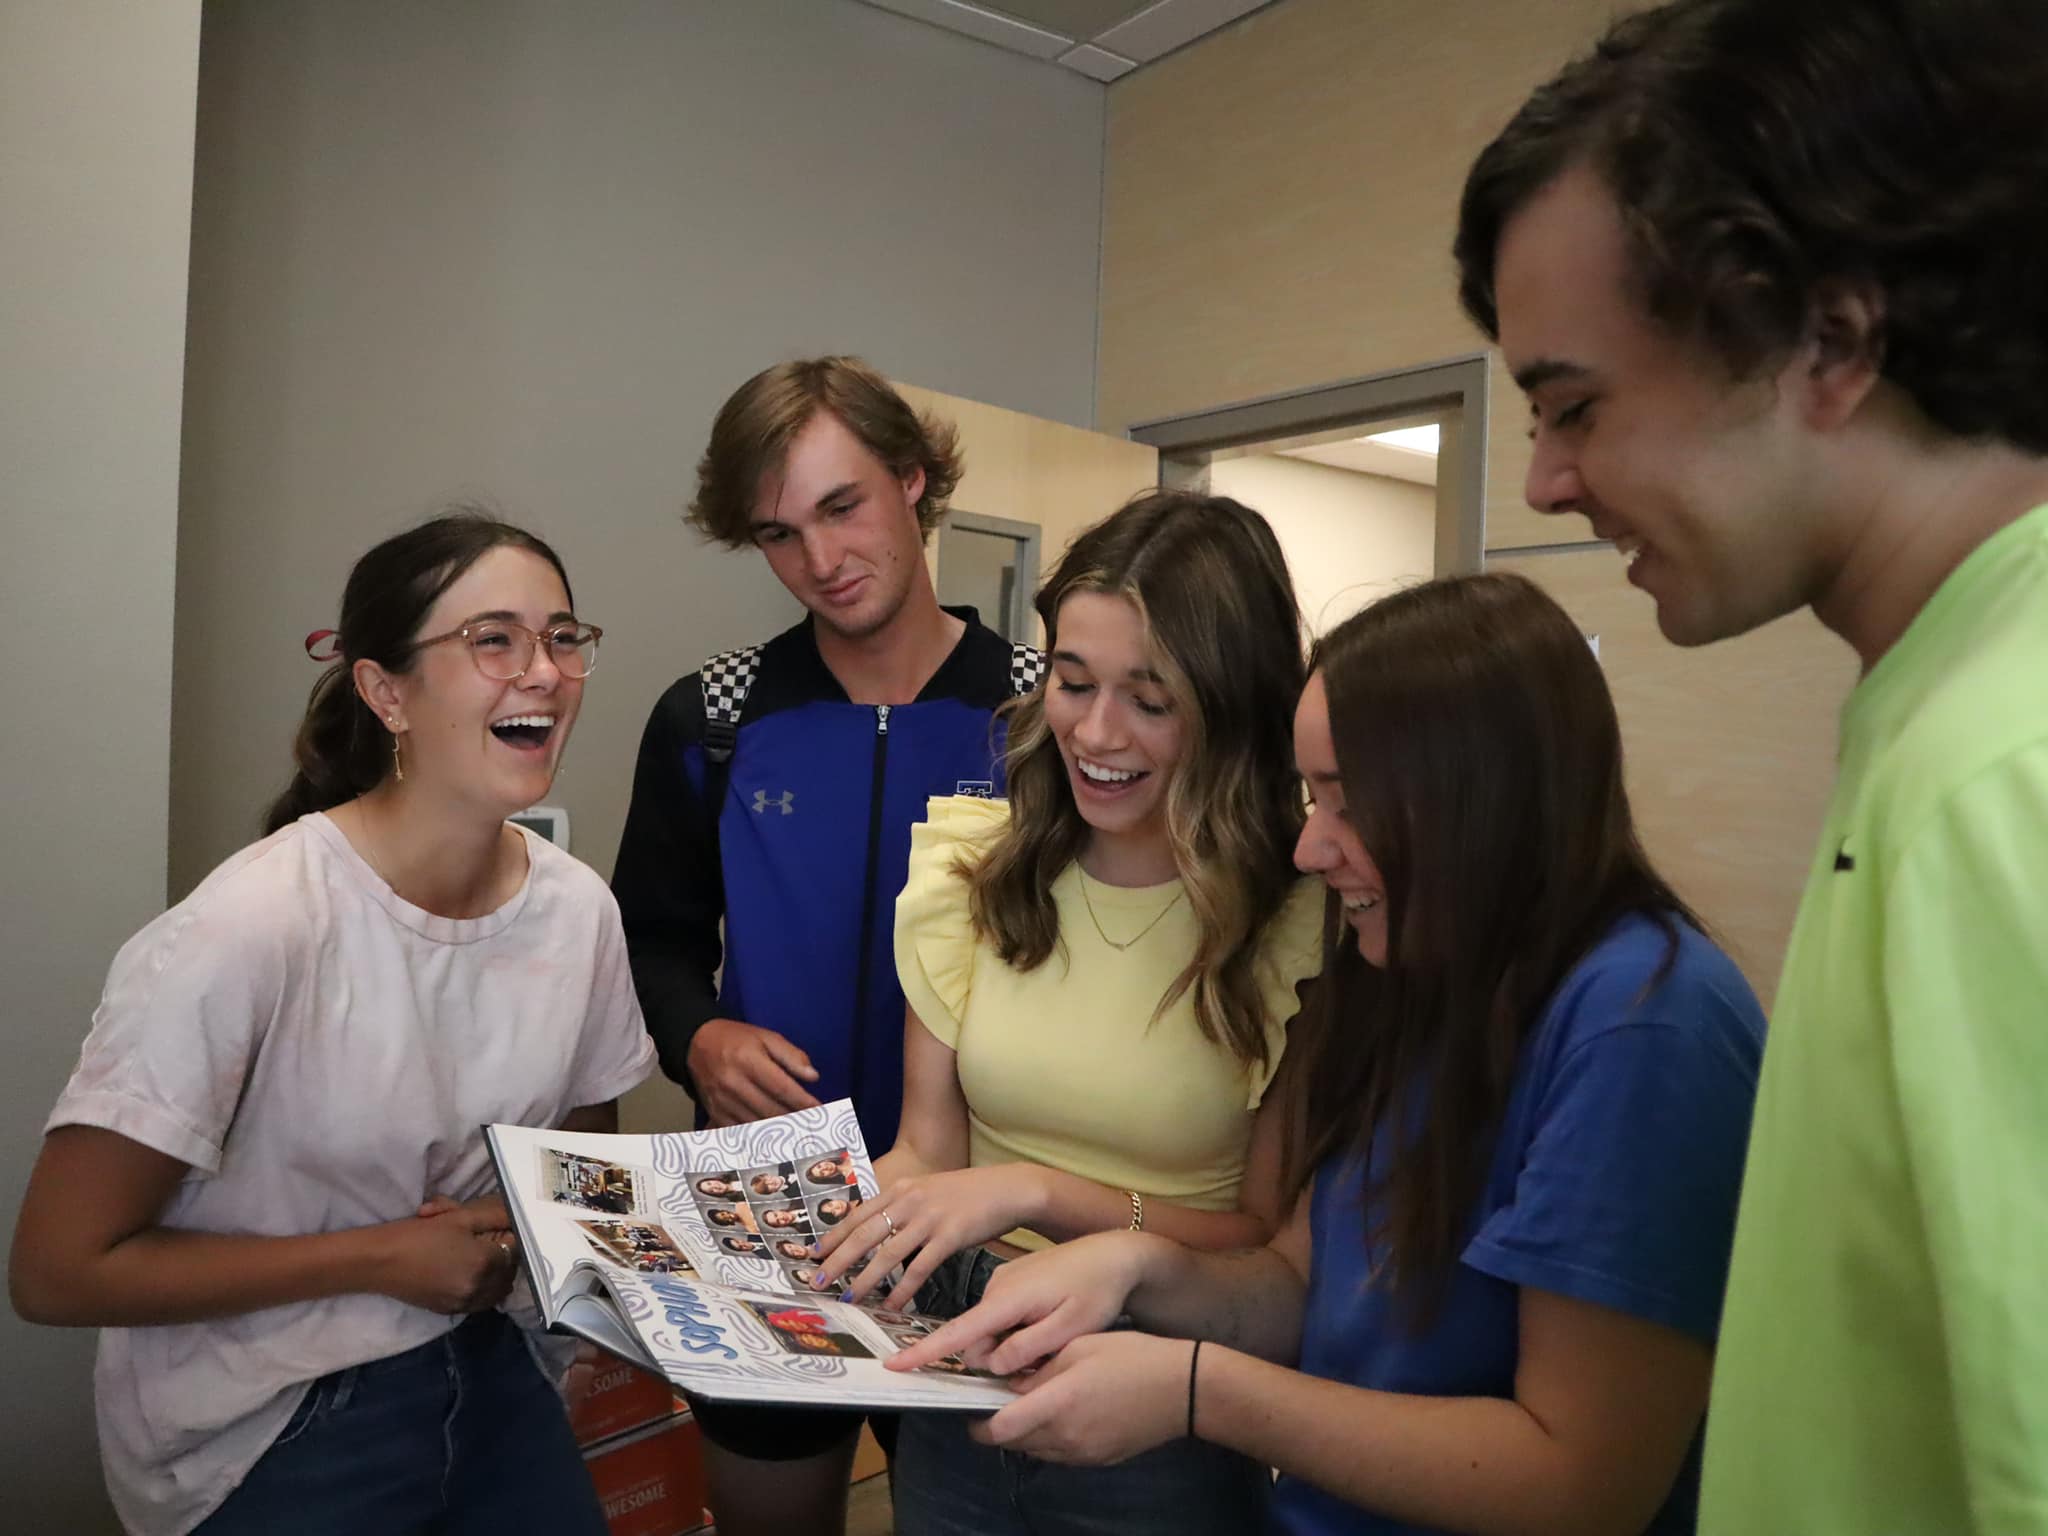 A photo of multiple students surrounding a yearbook and smiling